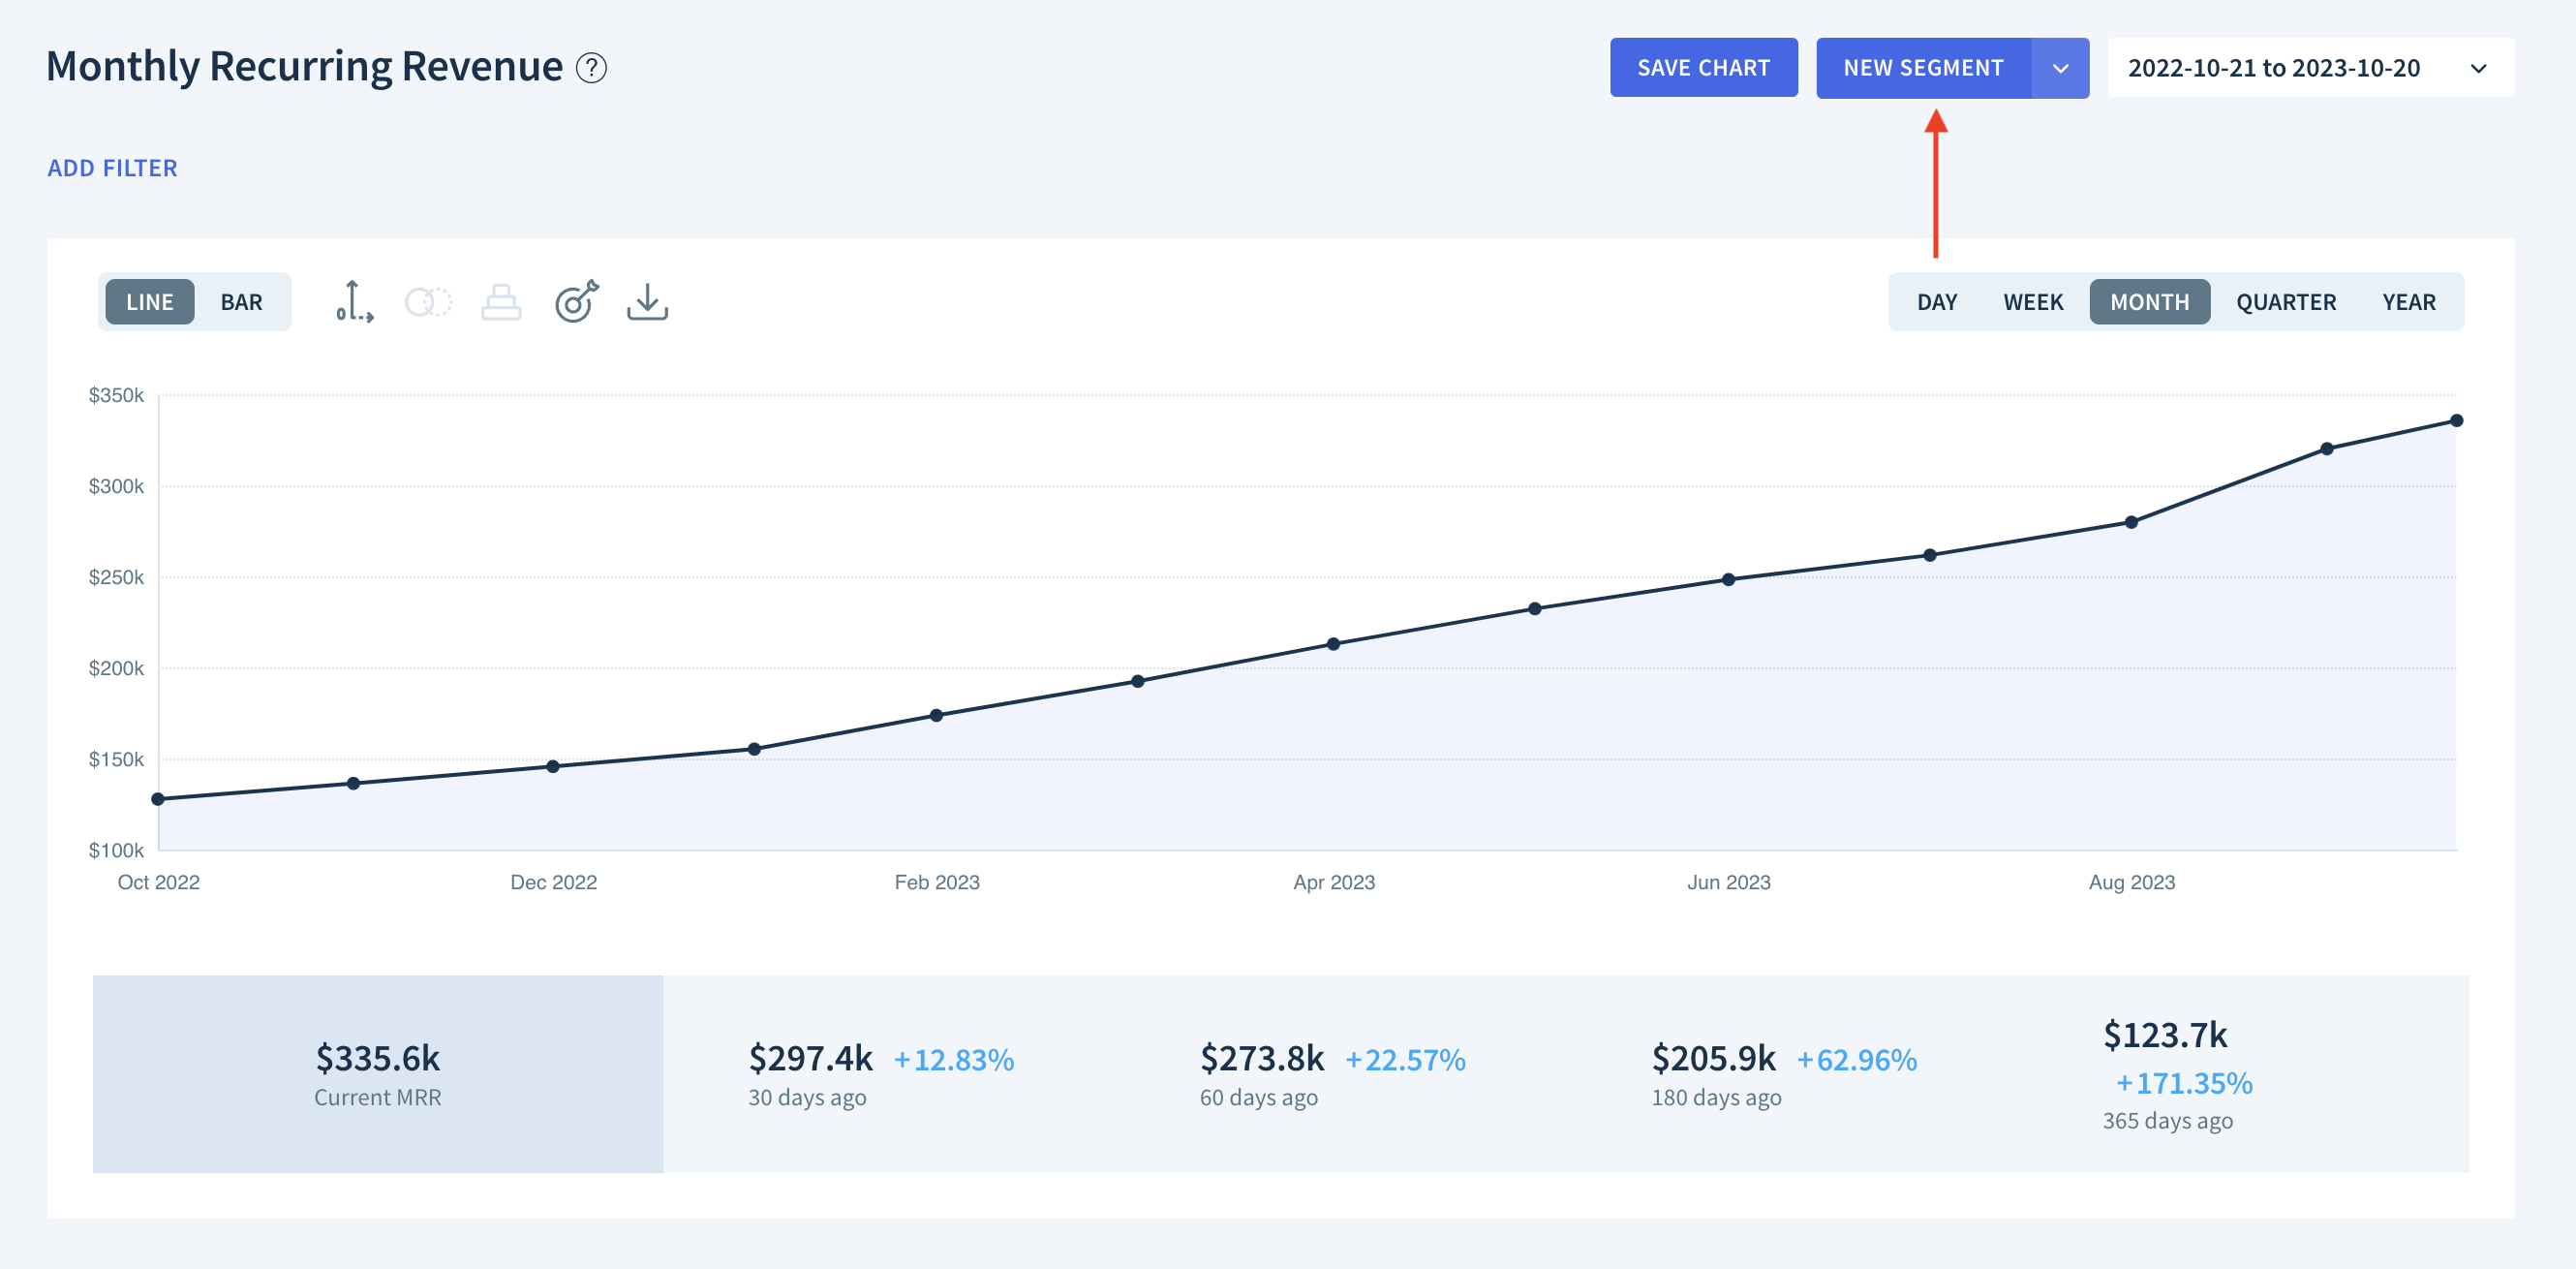 Screenshot of the Monthly Recurring Revenue chart with an arrow pointing to the New Segment button.